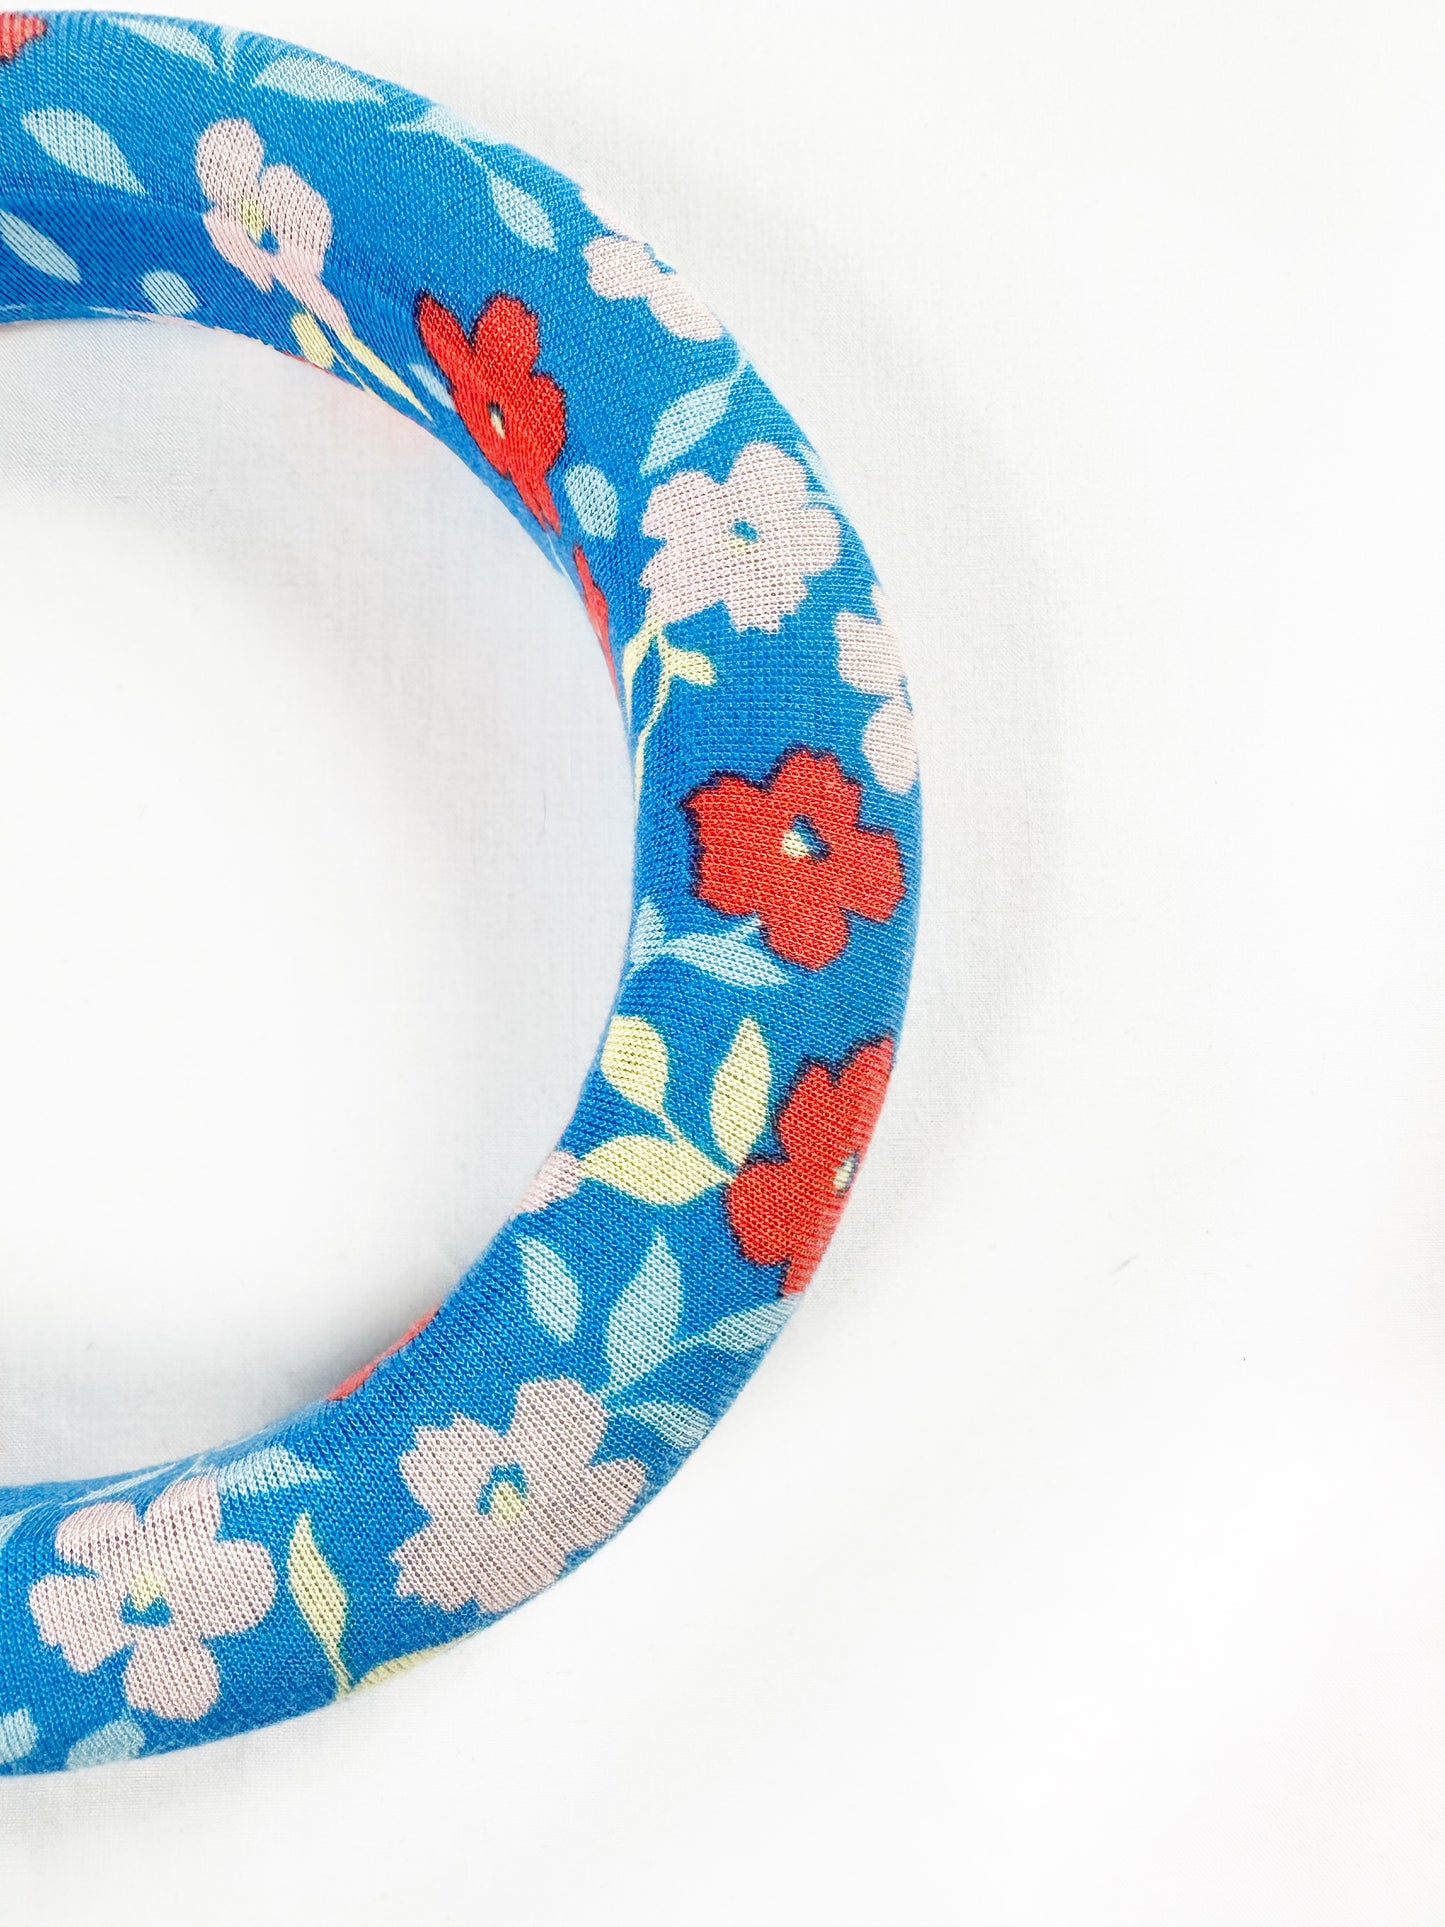 Padded Headband in vibrant blue floral